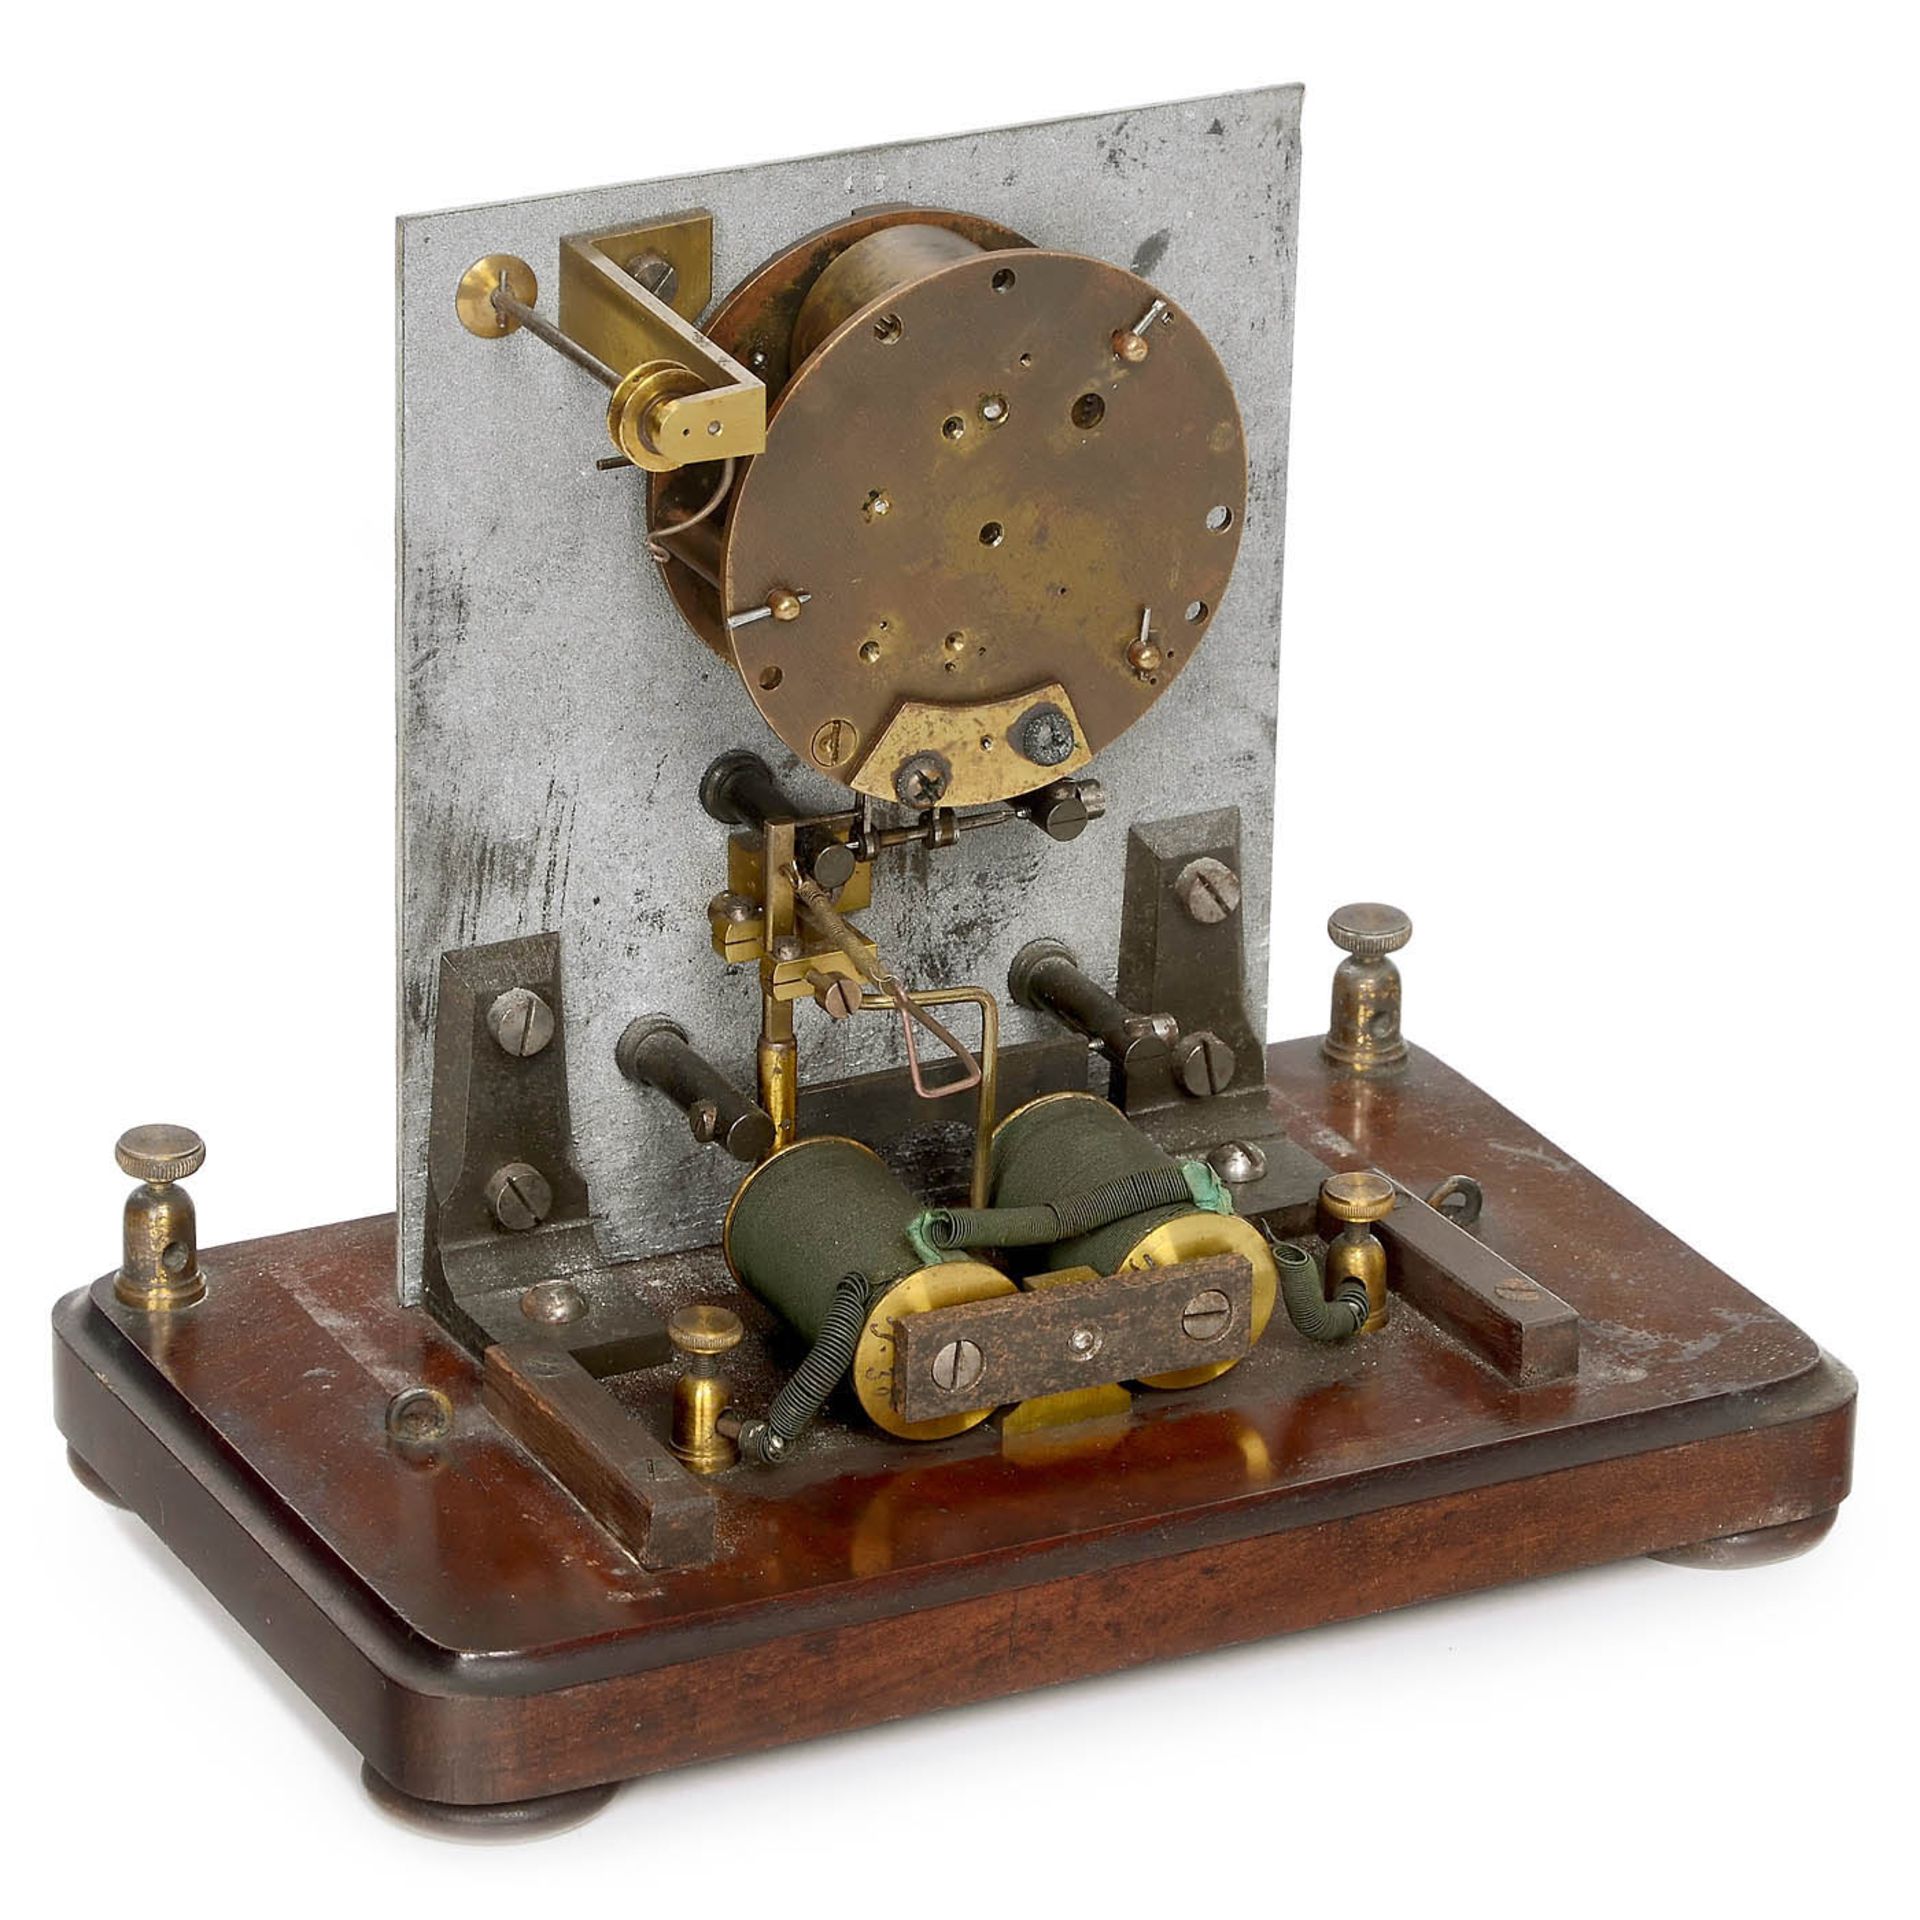 French Dial Telegraph Set by Br&#233;guet, c. 1855 - Image 4 of 4